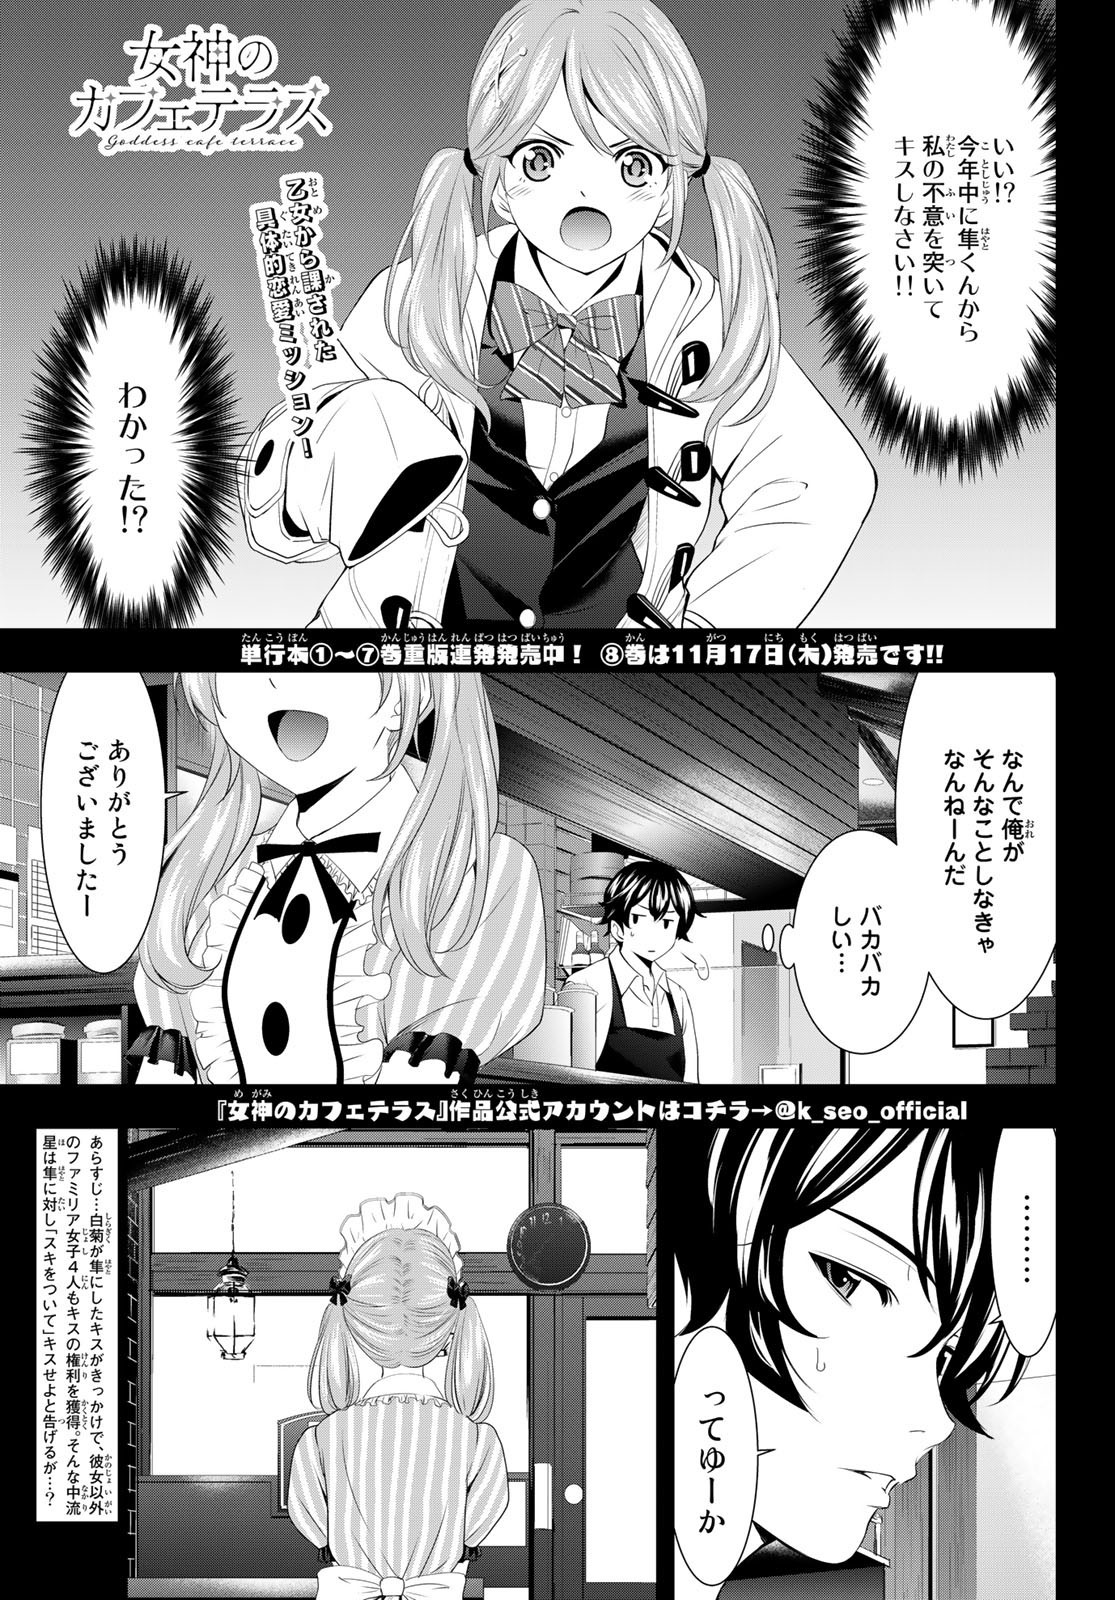 Goddess-Cafe-Terrace - Chapter 081 - Page 1